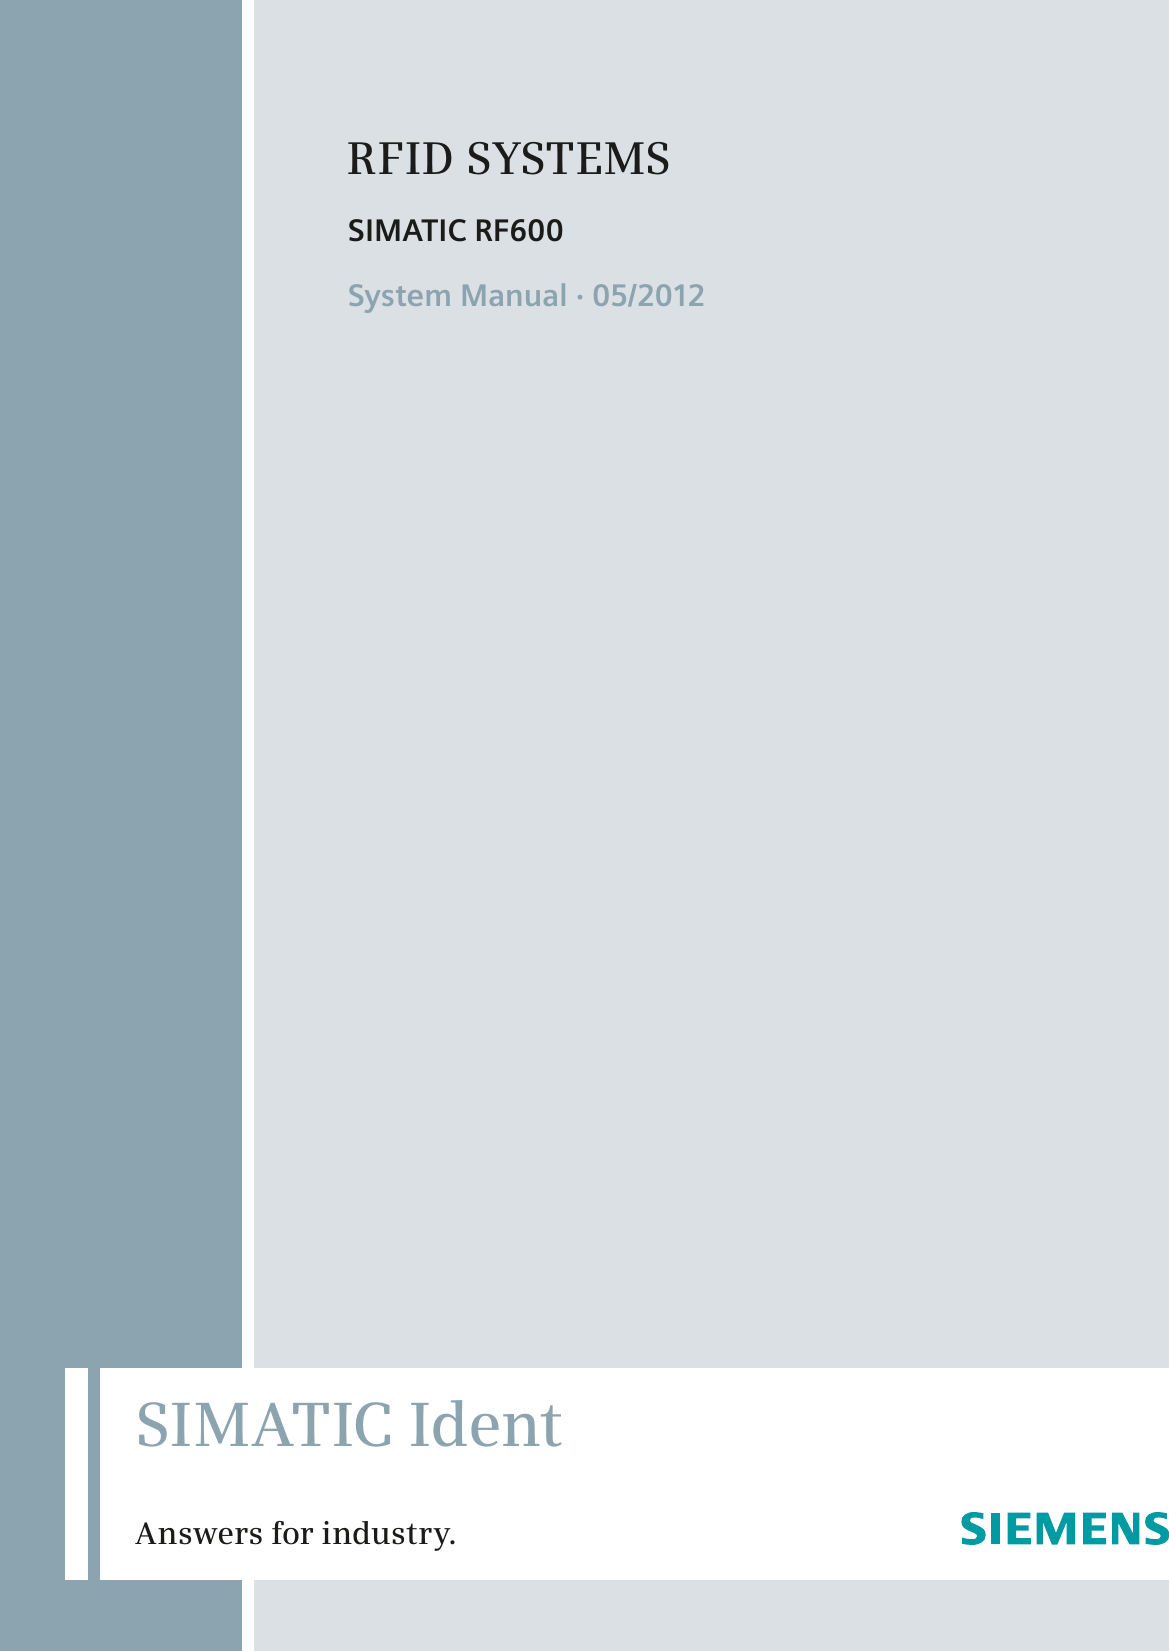  Answers for industry.SIMATIC IdentRFID SYSTEMSSIMATIC RF600System Manual · 05/2012